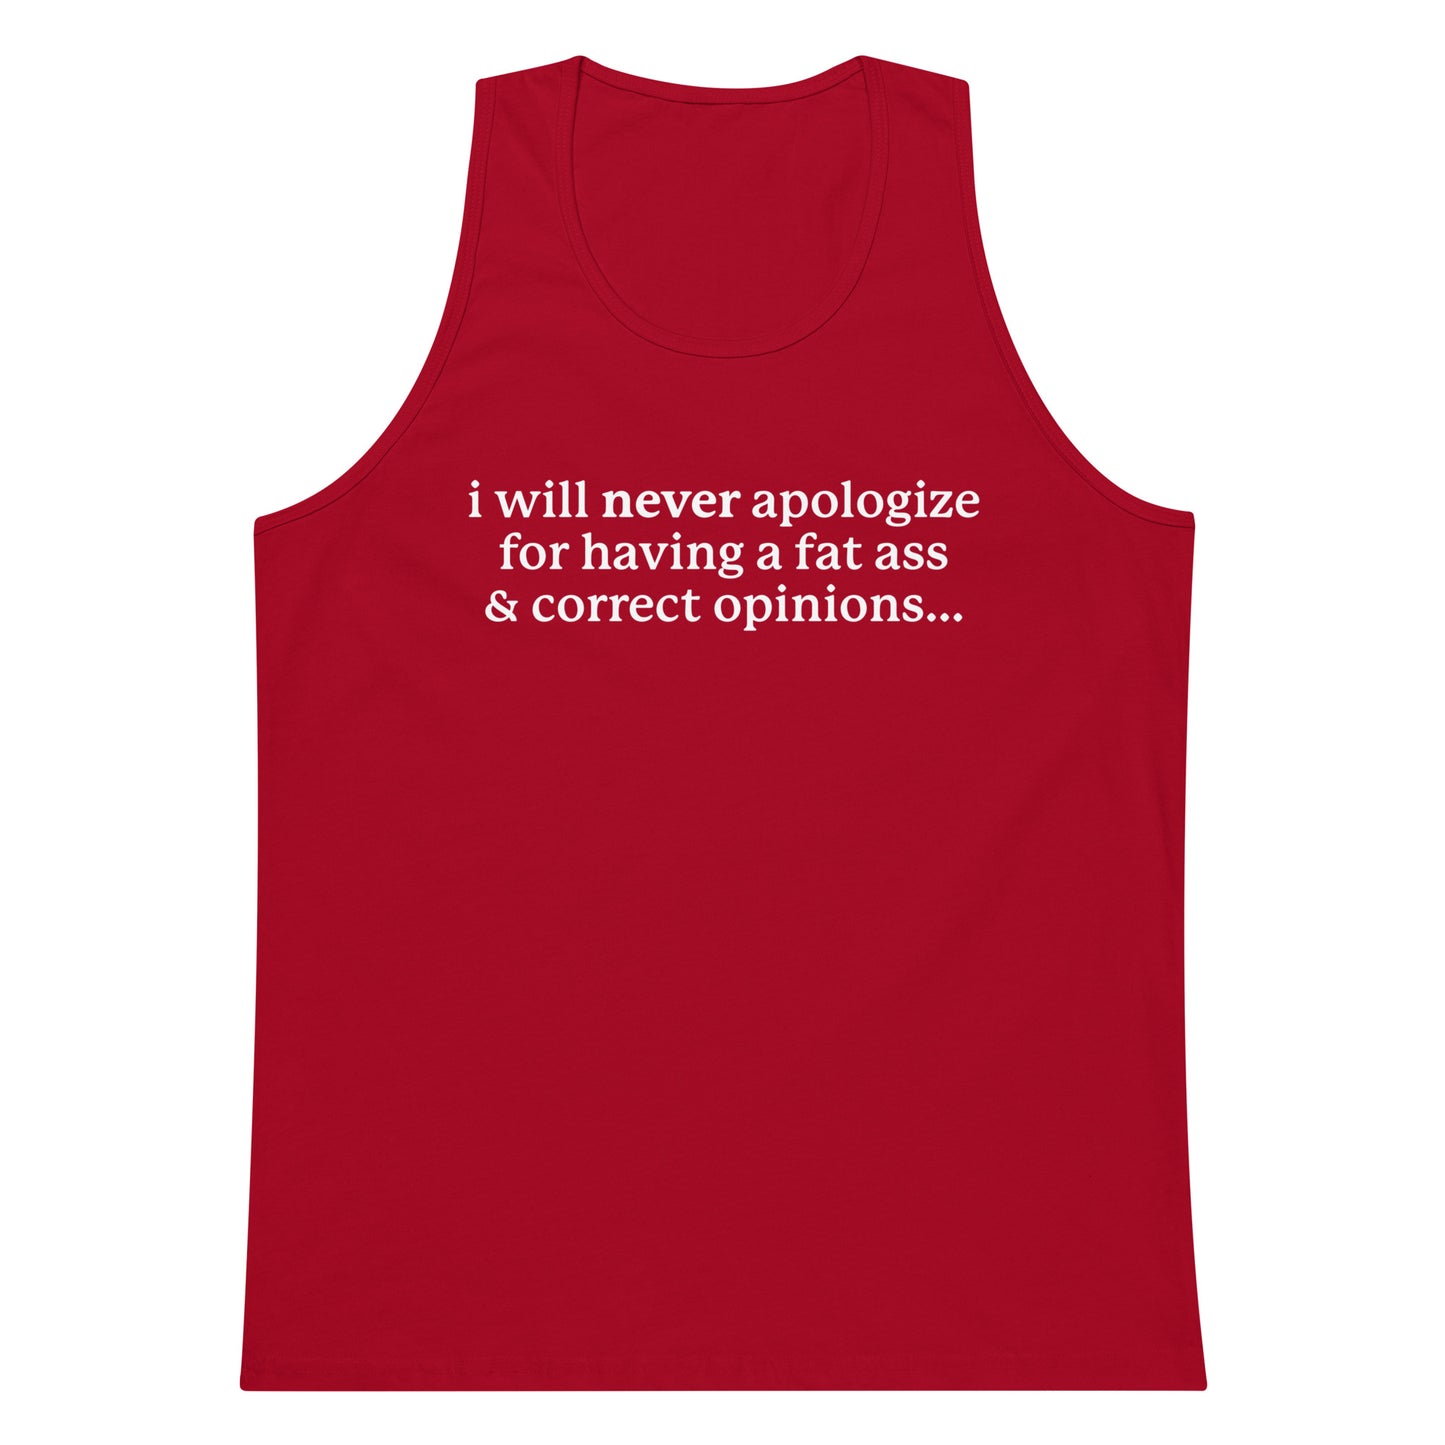 I Will Never Apologize (Fat Ass & Correct Opinions) tank top